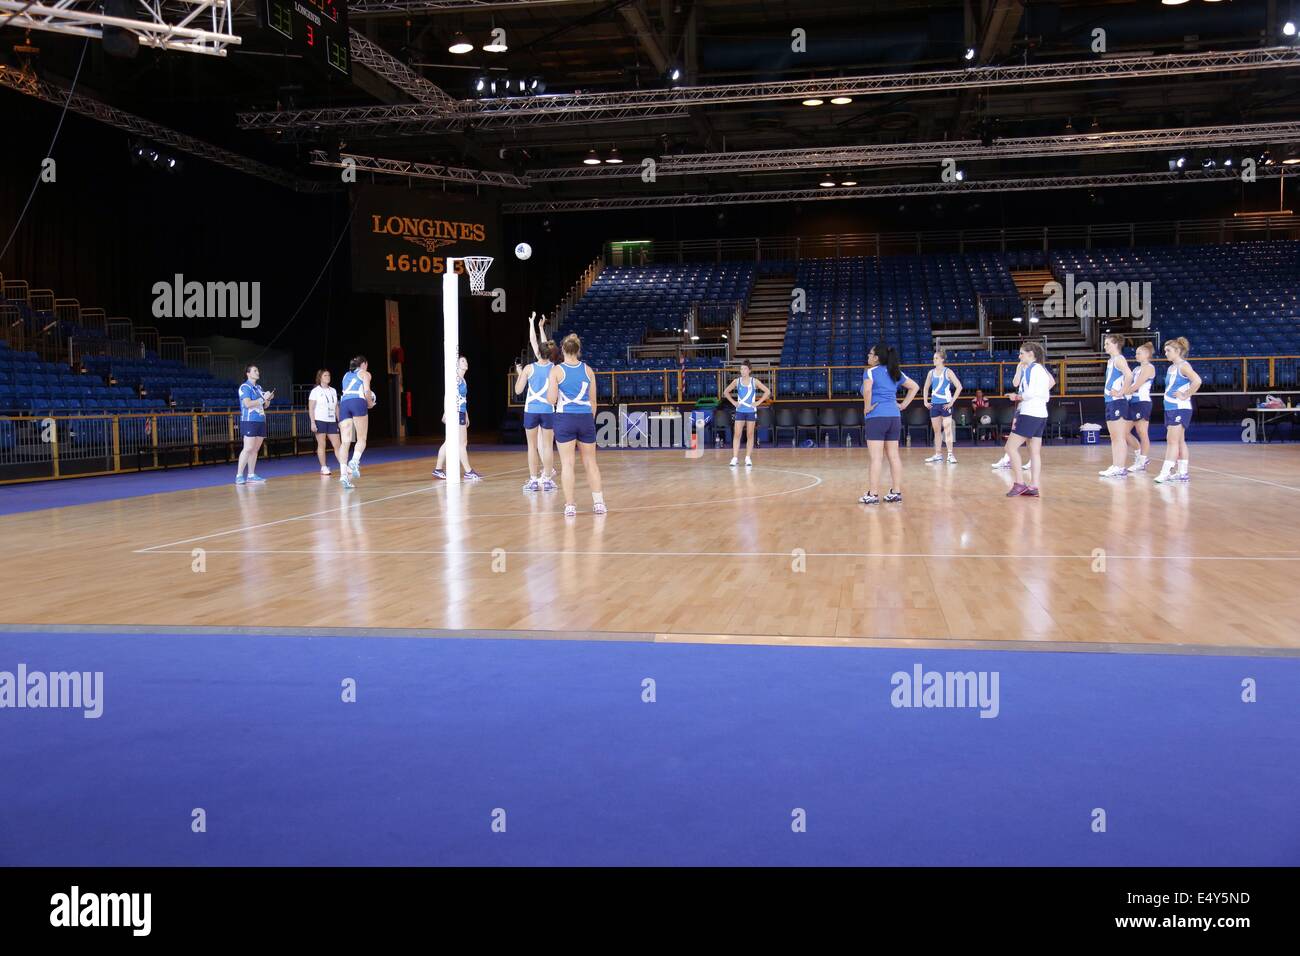 Scottish Exhibition and Conference Centre (SECC), Glasgow, Scotland, UK, Thursday, 17th July, 2014. Team Scotland training in the venue for the 2014 Commonwealth Games Netball Competition Stock Photo